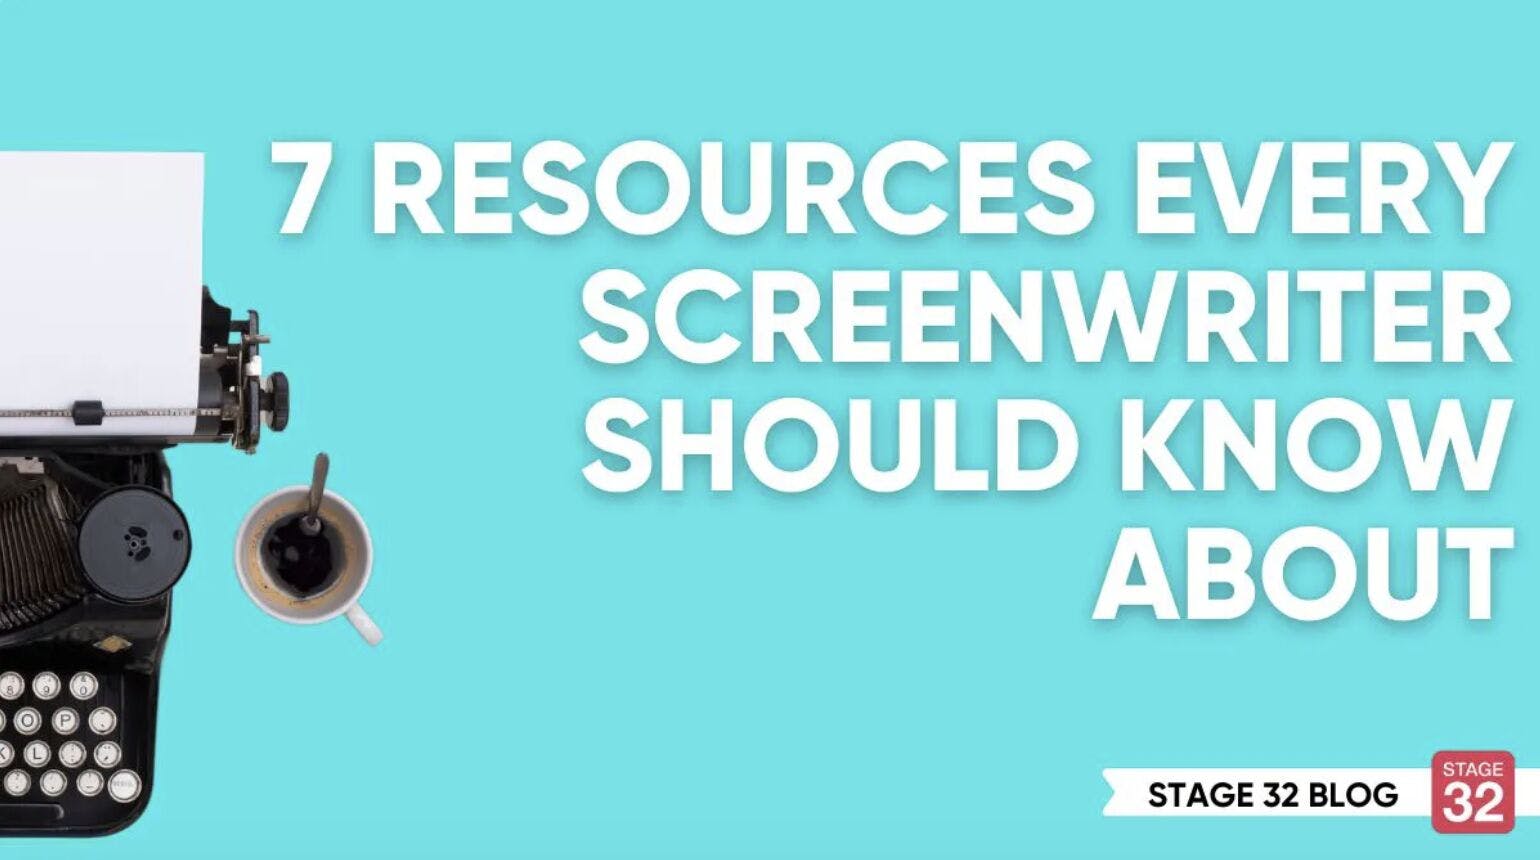 7 Resources Every Screenwriter Should Know About